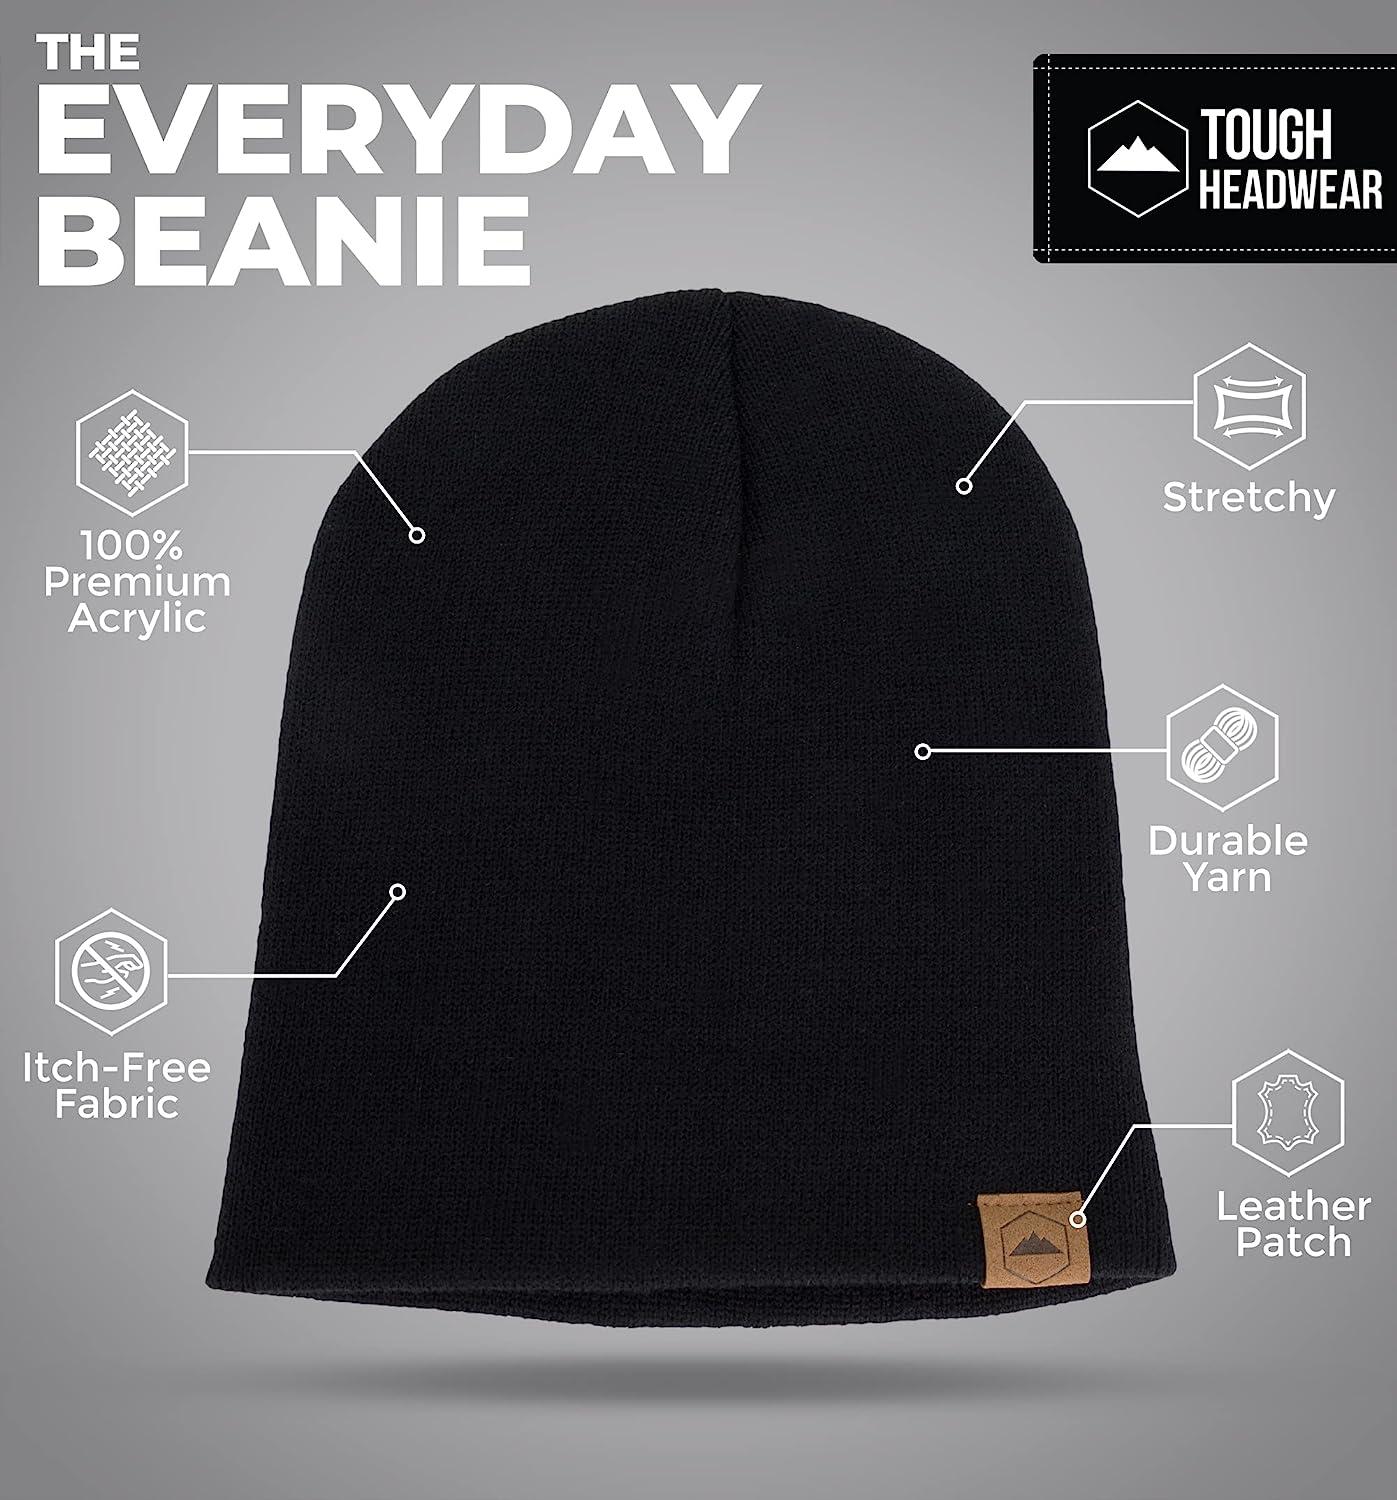 Tough Headwear Knit Beanie Winter Hat Cold Women One Skate for Size - Men and for Ribbed Weather Black Cap Stocking - Hat, Cap Warm Toboggan